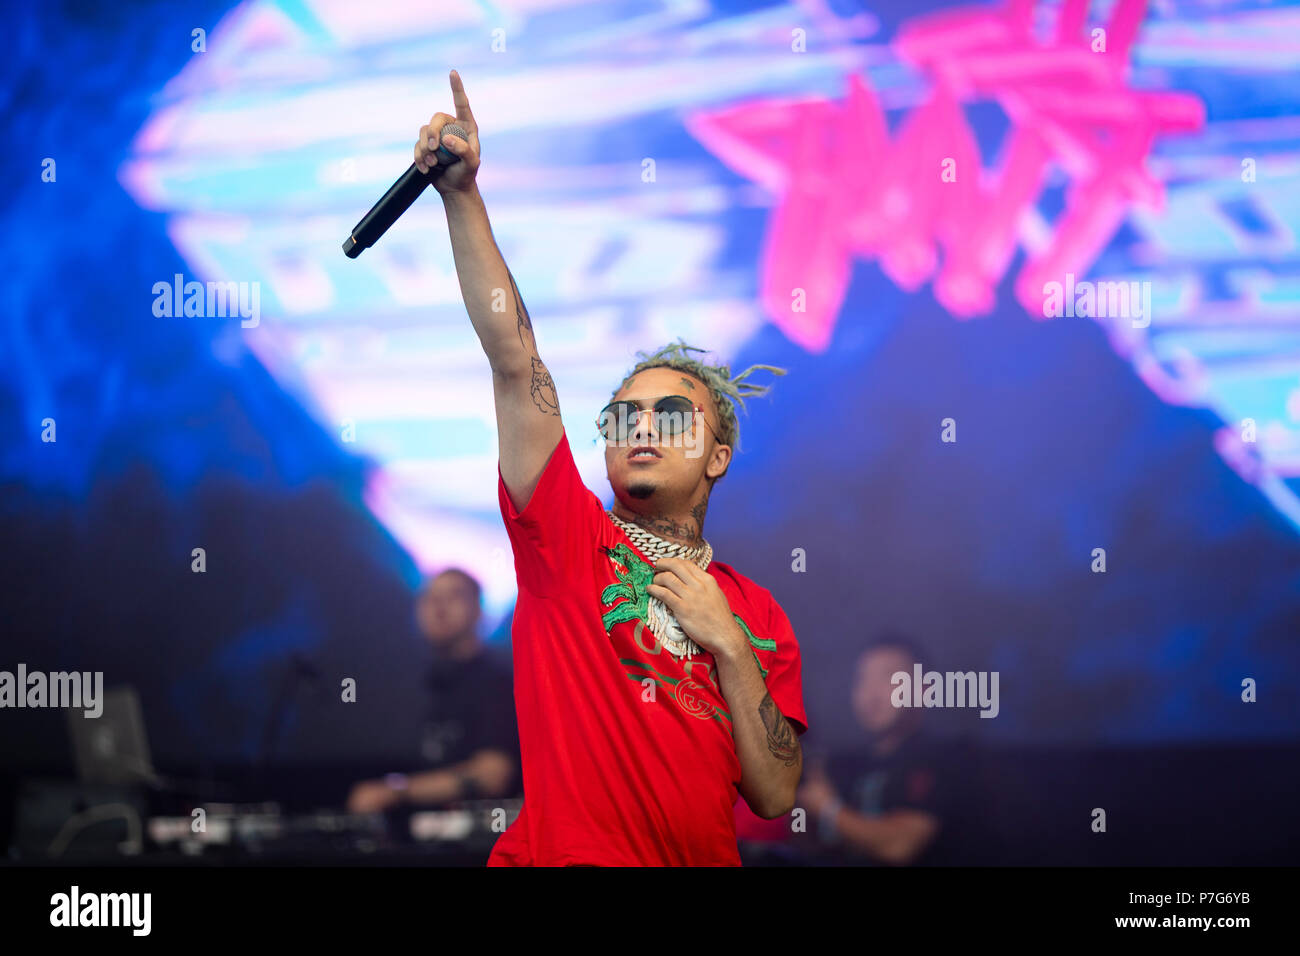 Germany, Graefenhainichen. 6th July, 2018. Rapper Lil performs on the main stage of the 'Splash!' festival. For three days hiphop performances will be held in the industrial environmet with tens of thousands of visitors expected. Credit: Alexander Prautzsch/dpa-Zentralbild/dpa/Alamy Live News Stock Photo